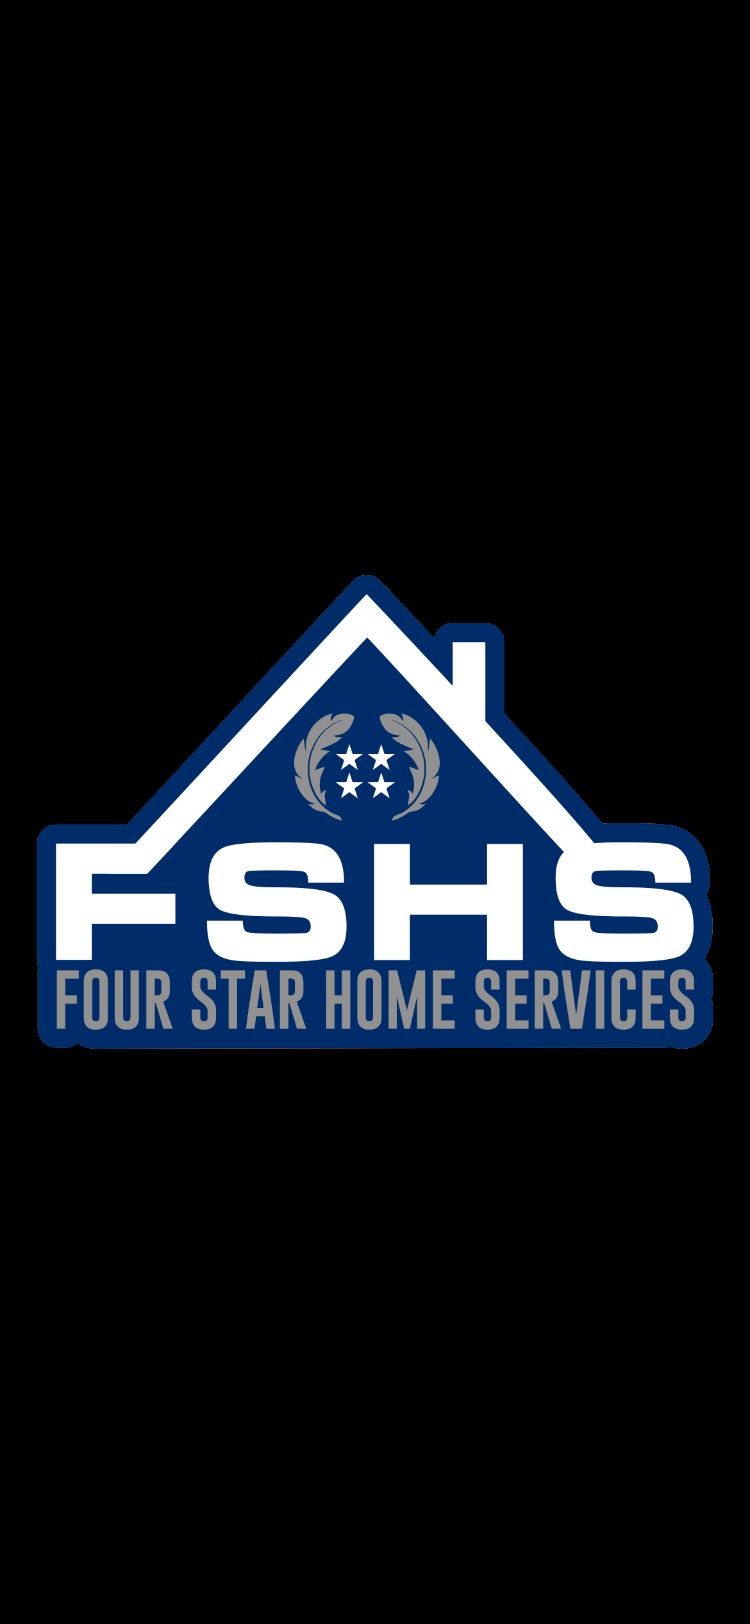 Four Star Home Services